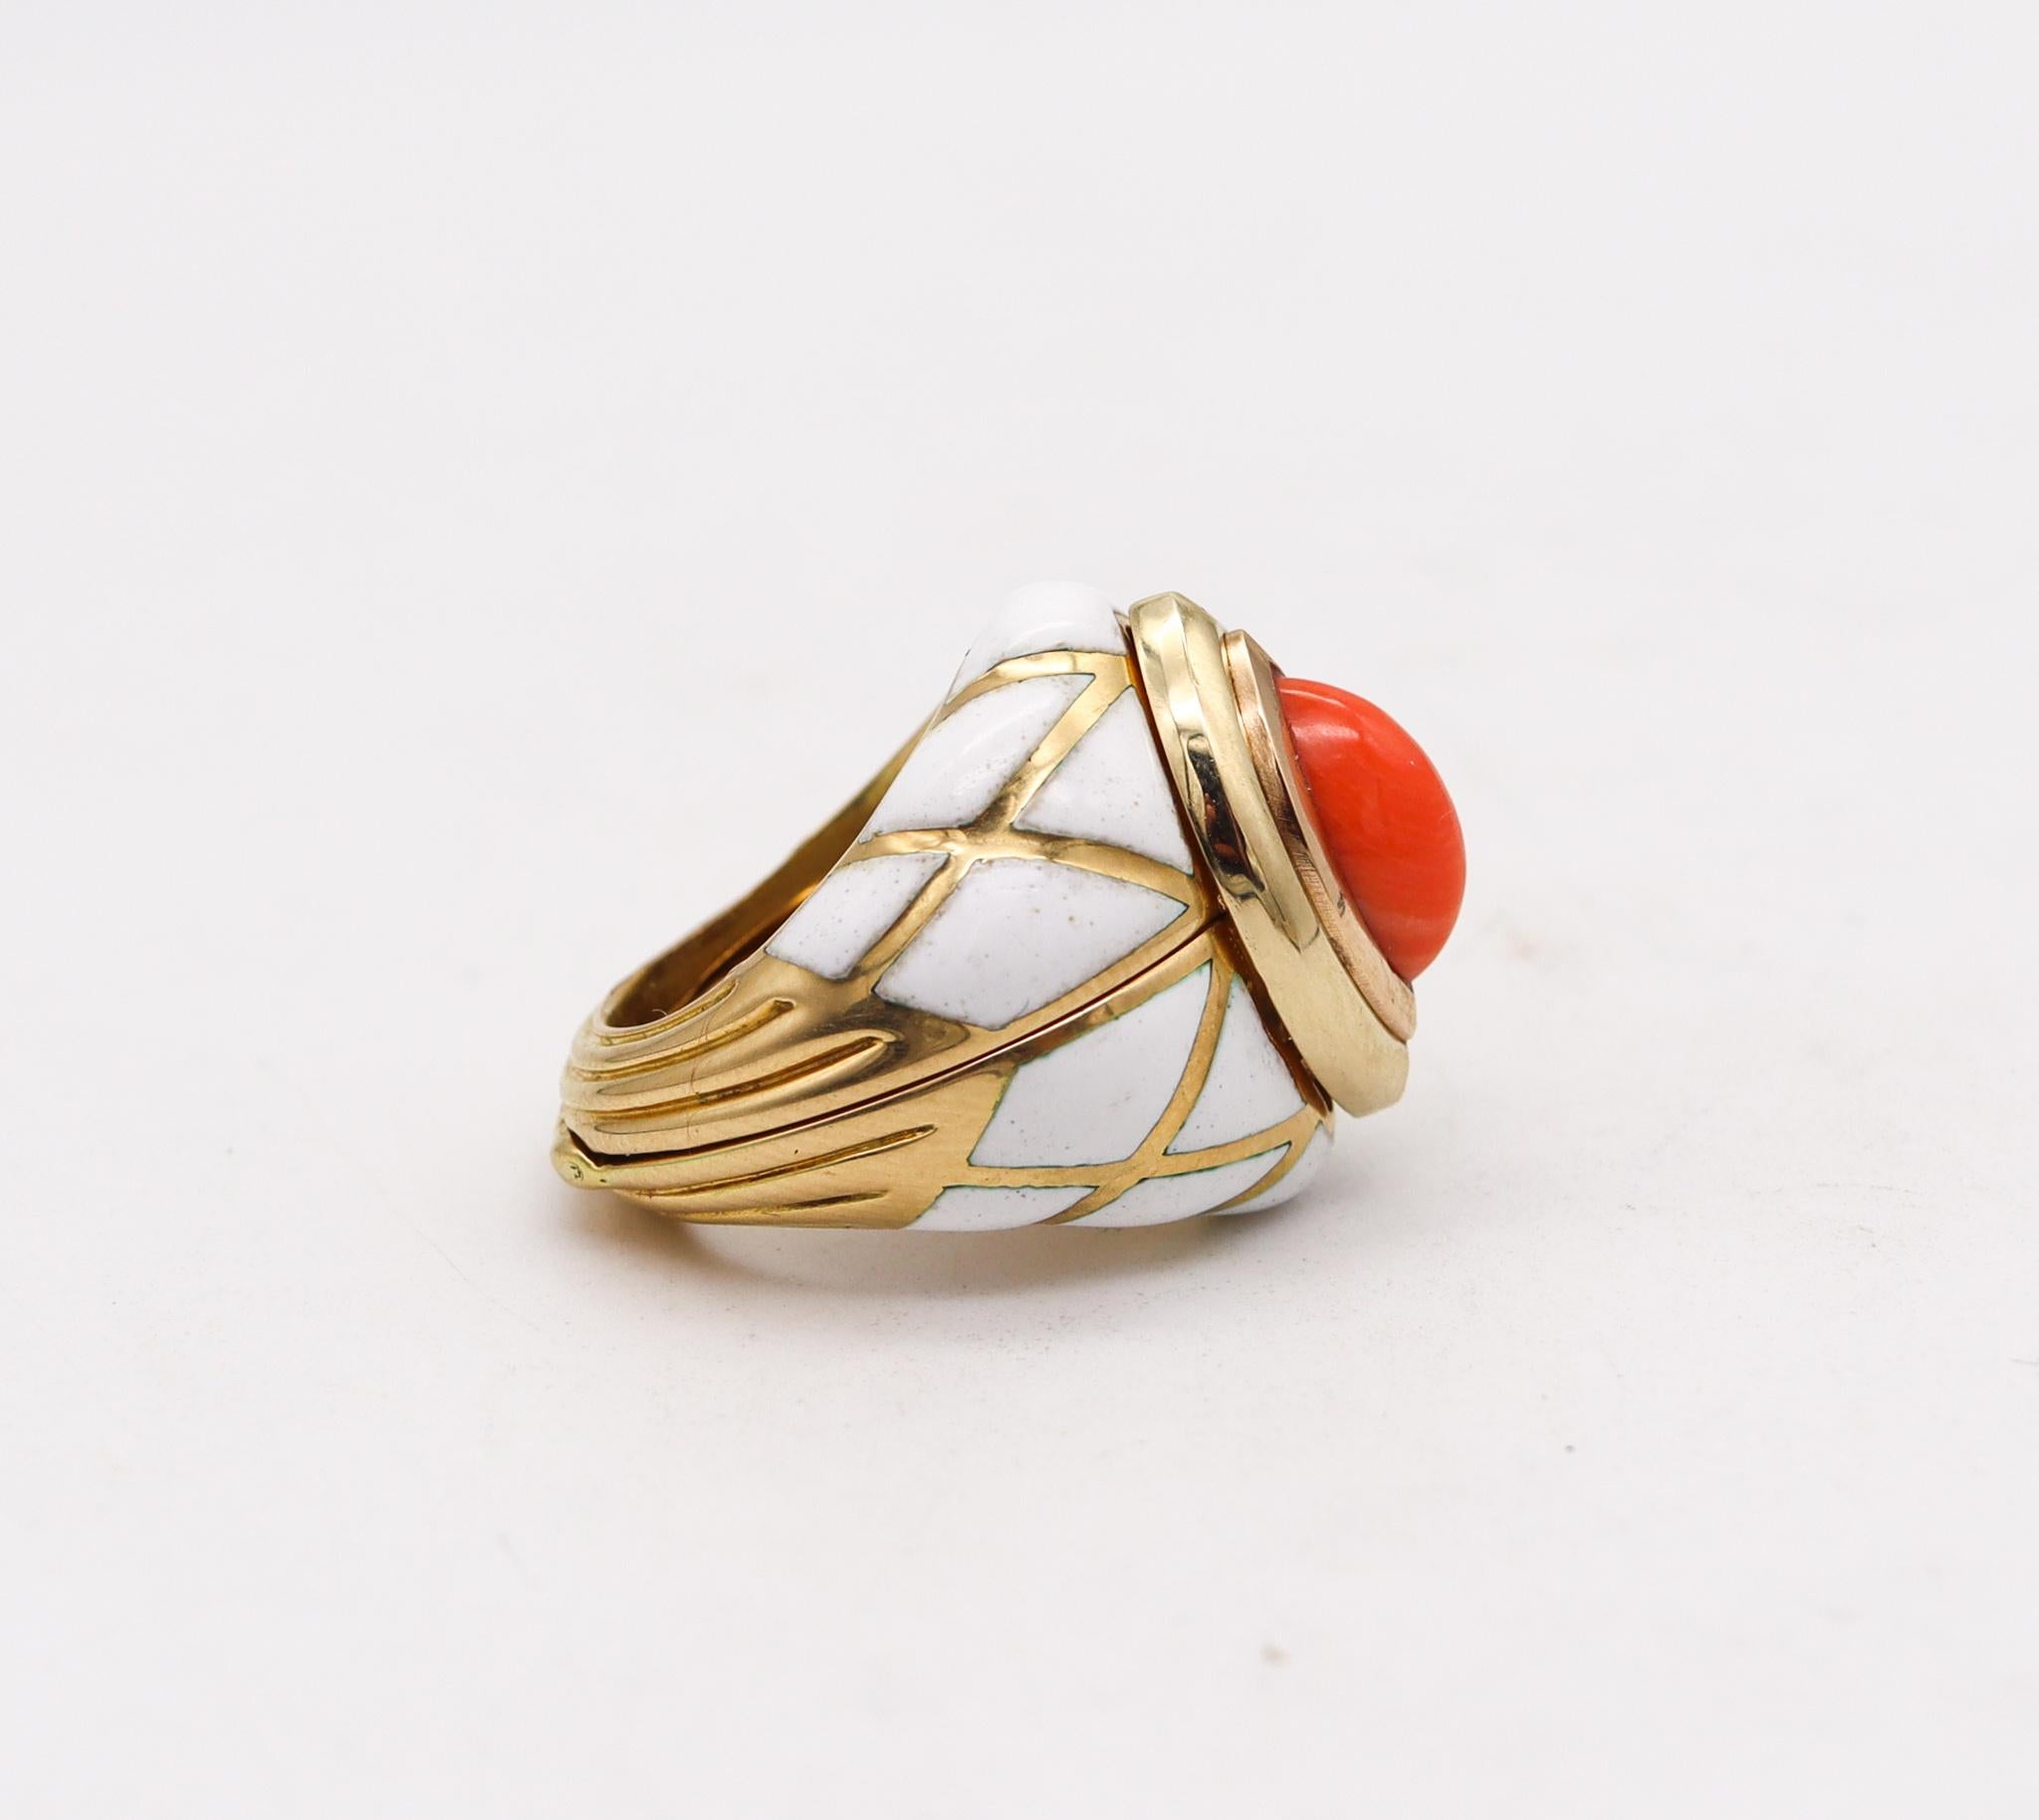 A convertible cocktail Ring Designed by David Webb (1925-1975).

Very rare cocktail convertible ring, created in New York City at David Webb's jewelry workshop in the 1970's. This striking bombshell ring was crafted in solid 18K yellow gold with a